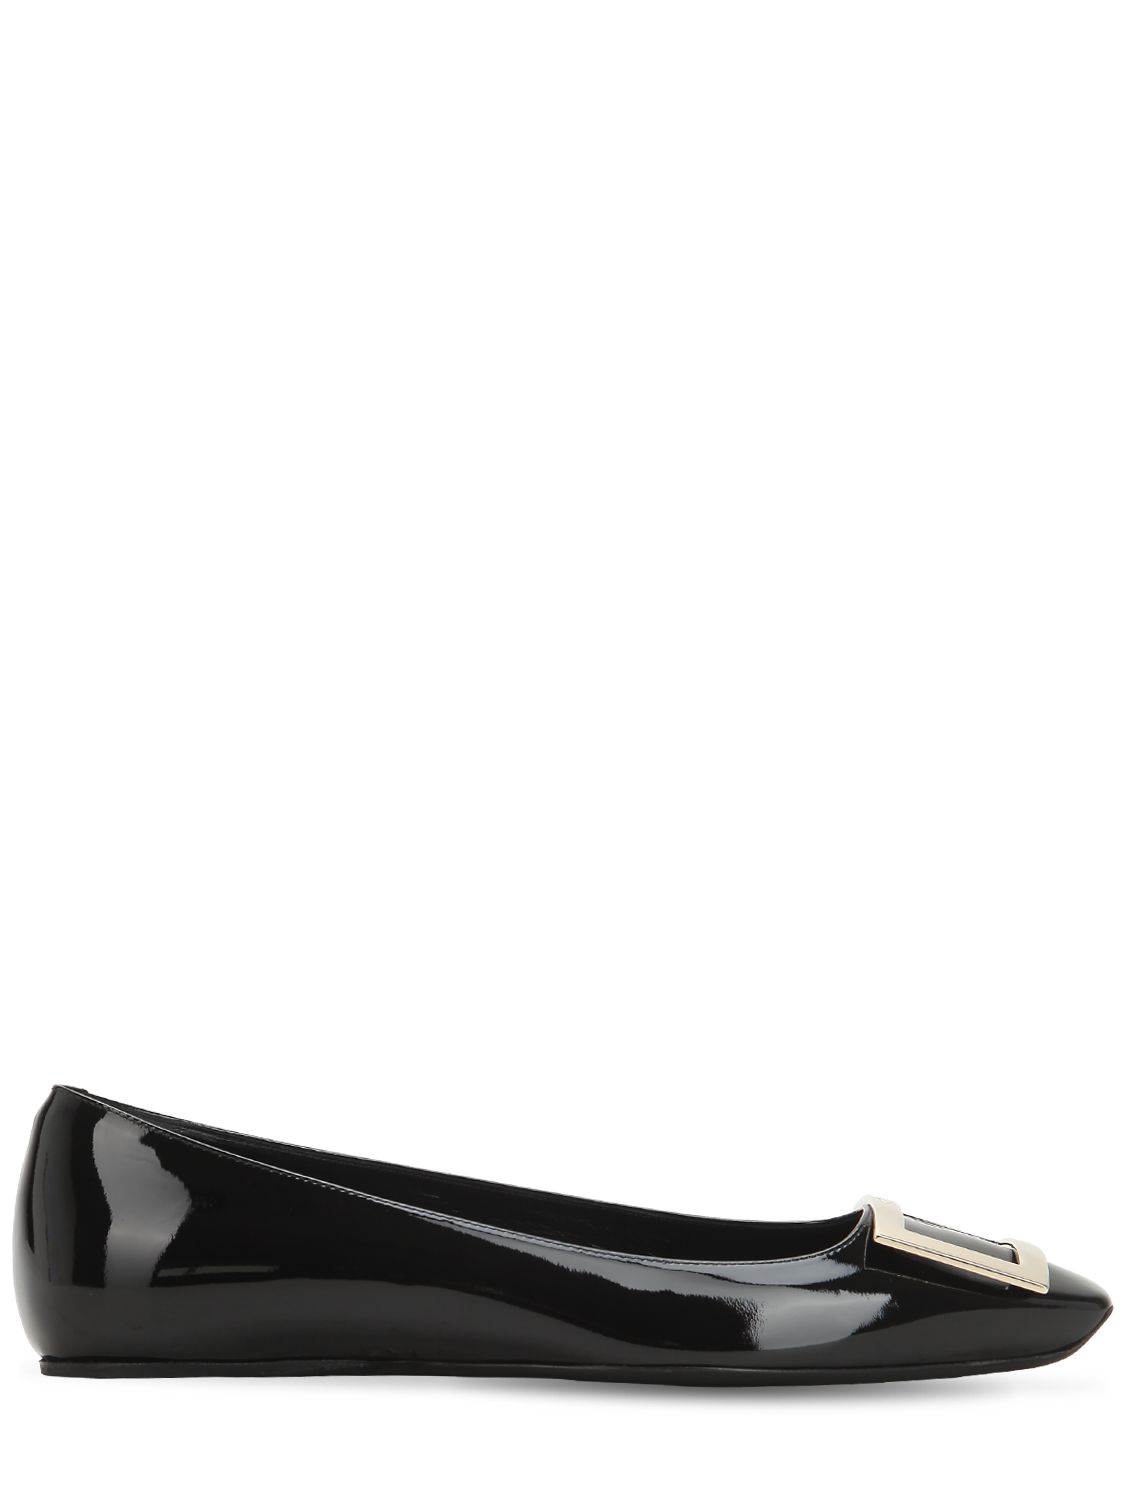 Image of 10mm Trompette Patent Leather Flats